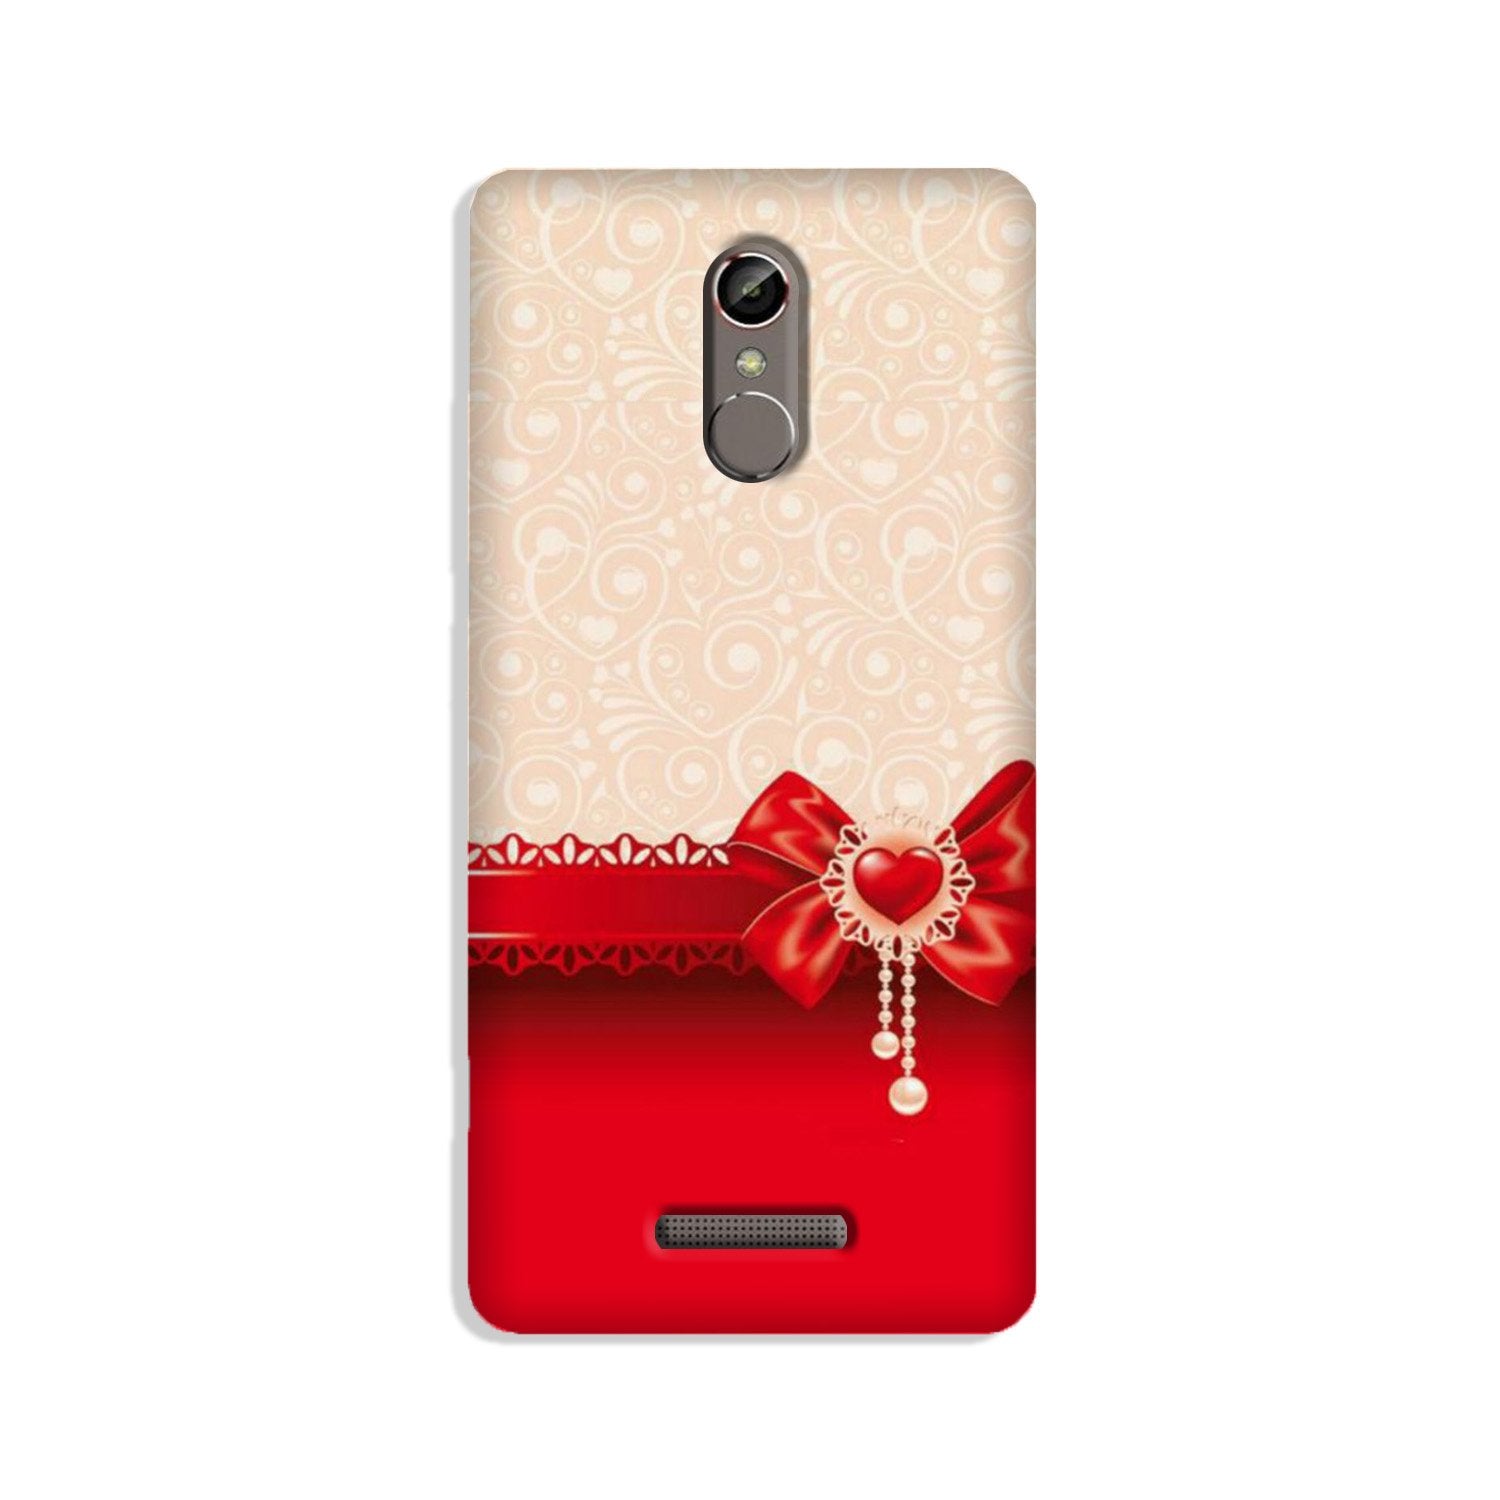 Gift Wrap3 Case for Redmi Note 3